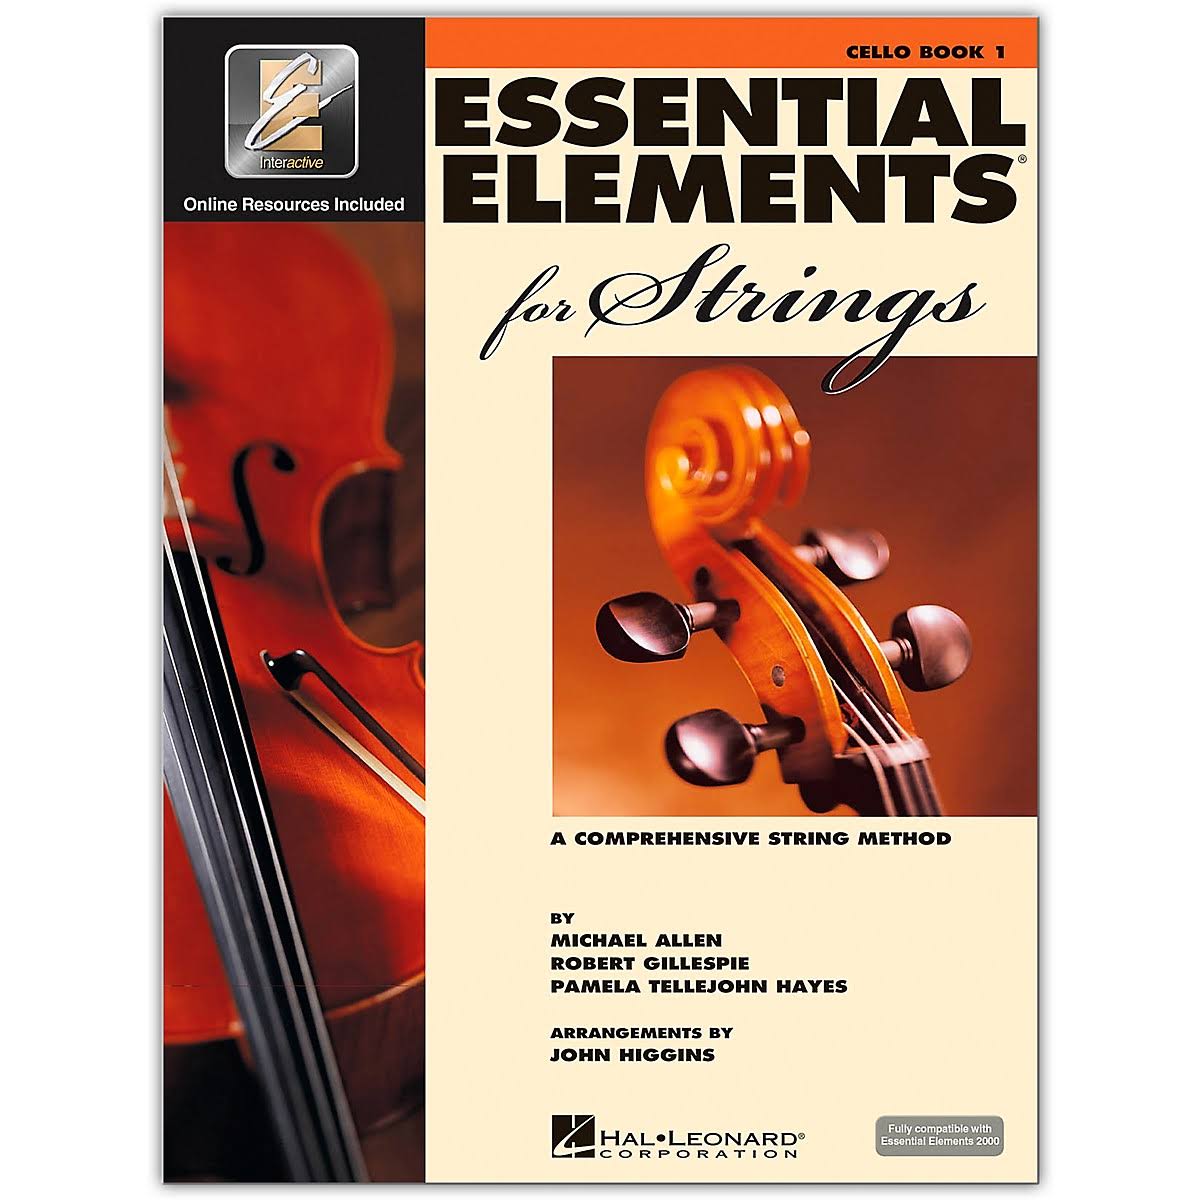 Essential Elements 2000 for Strings Book 1 - Cello